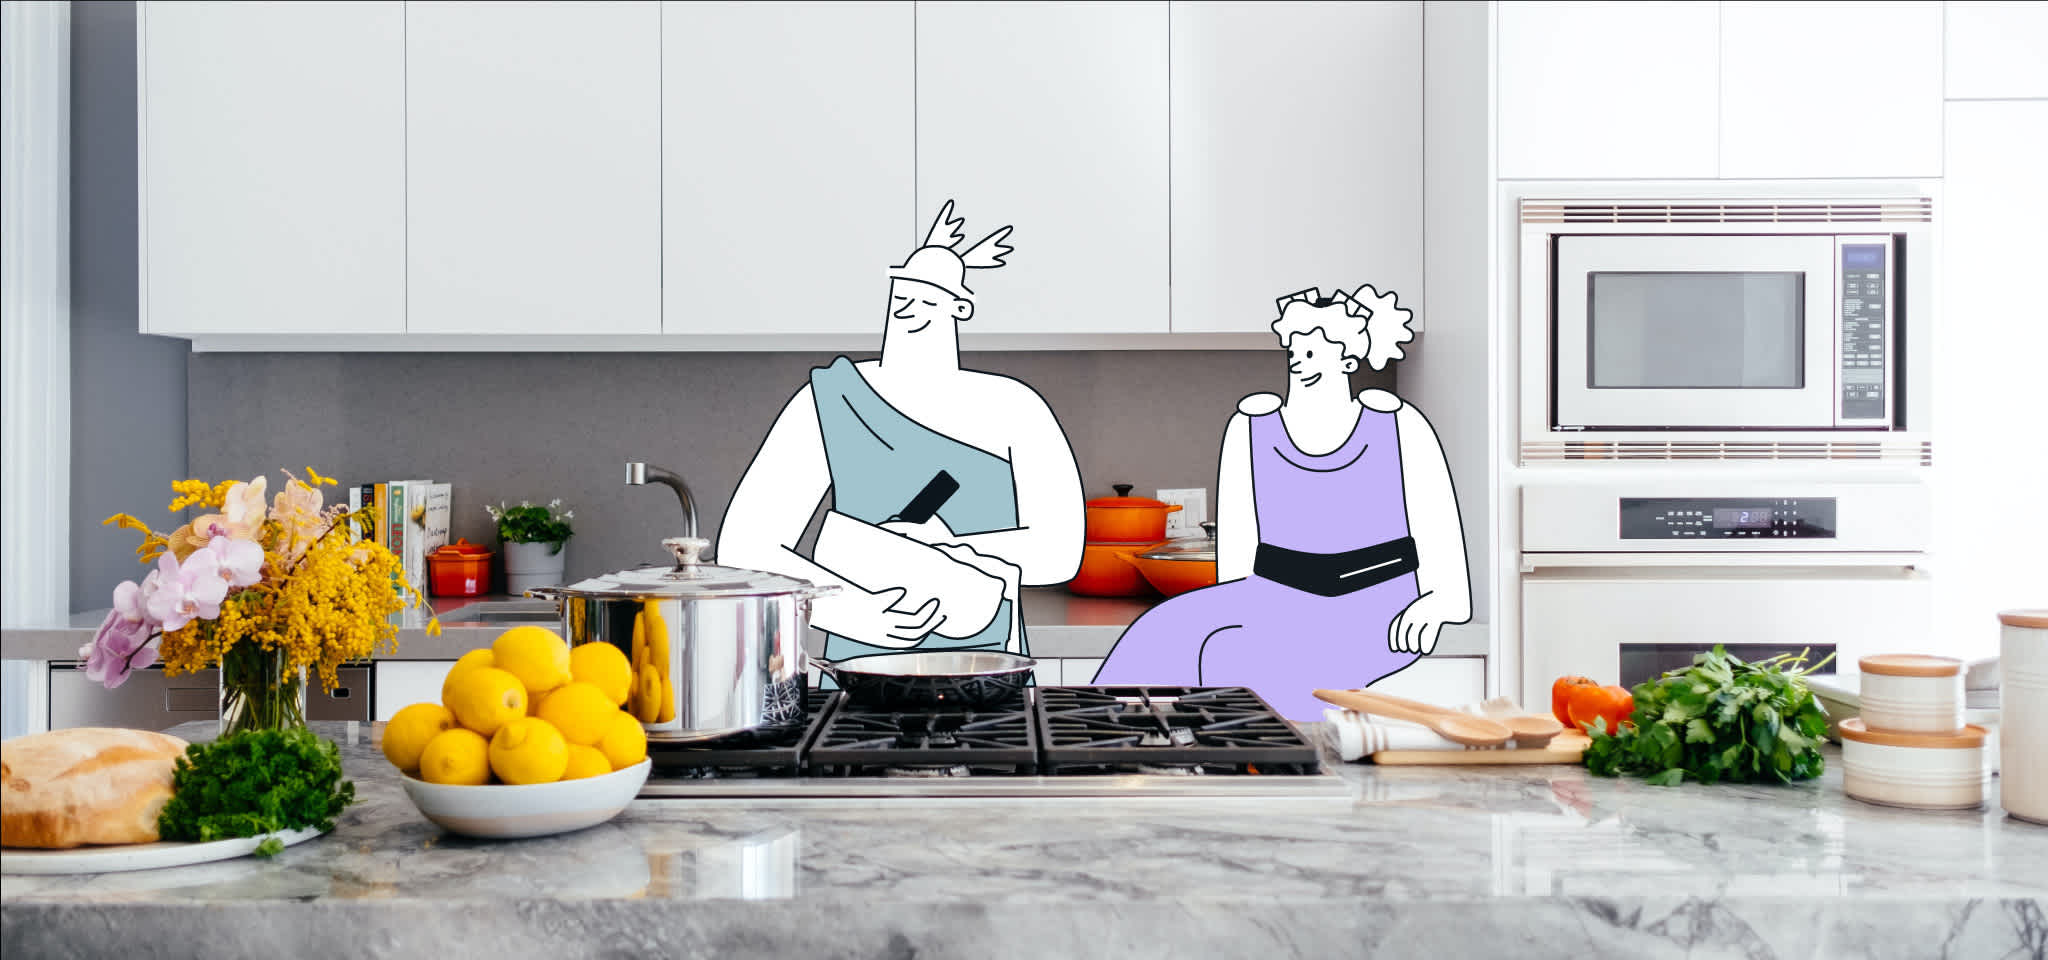 Hermes and Artemis bake a cake in a kitchen.